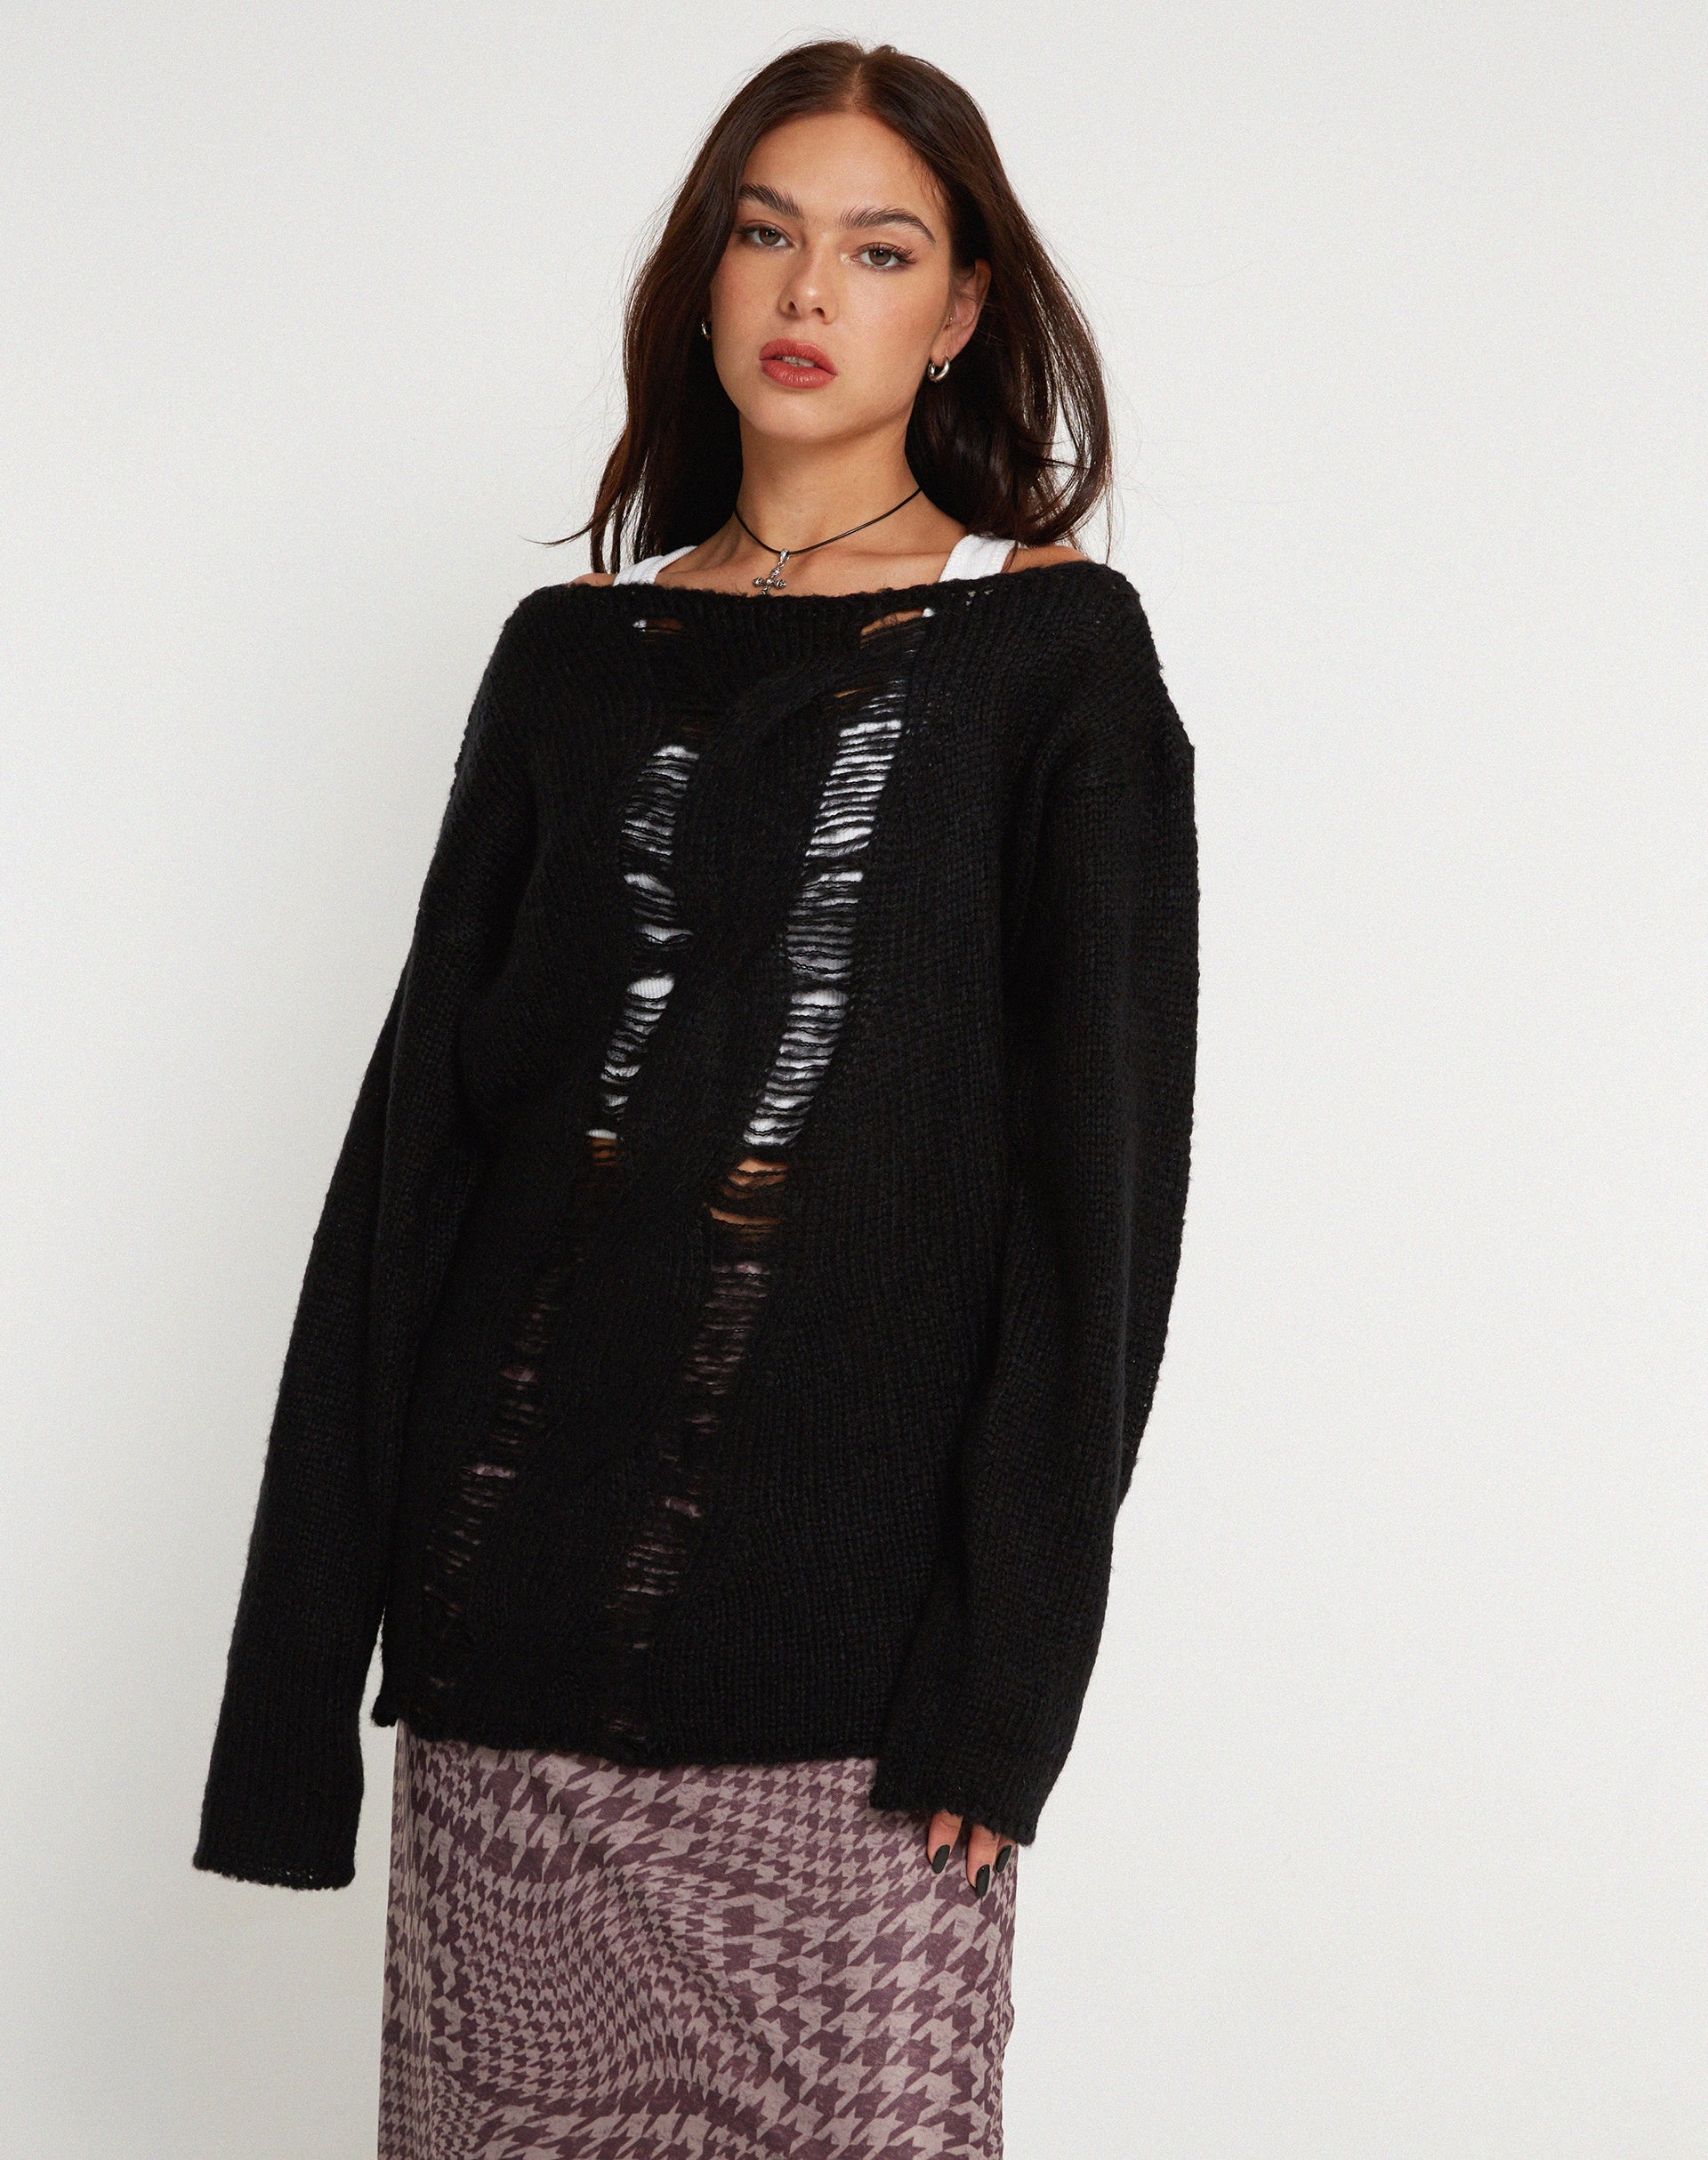 image of Akohara Laddered Knitted Top in Black